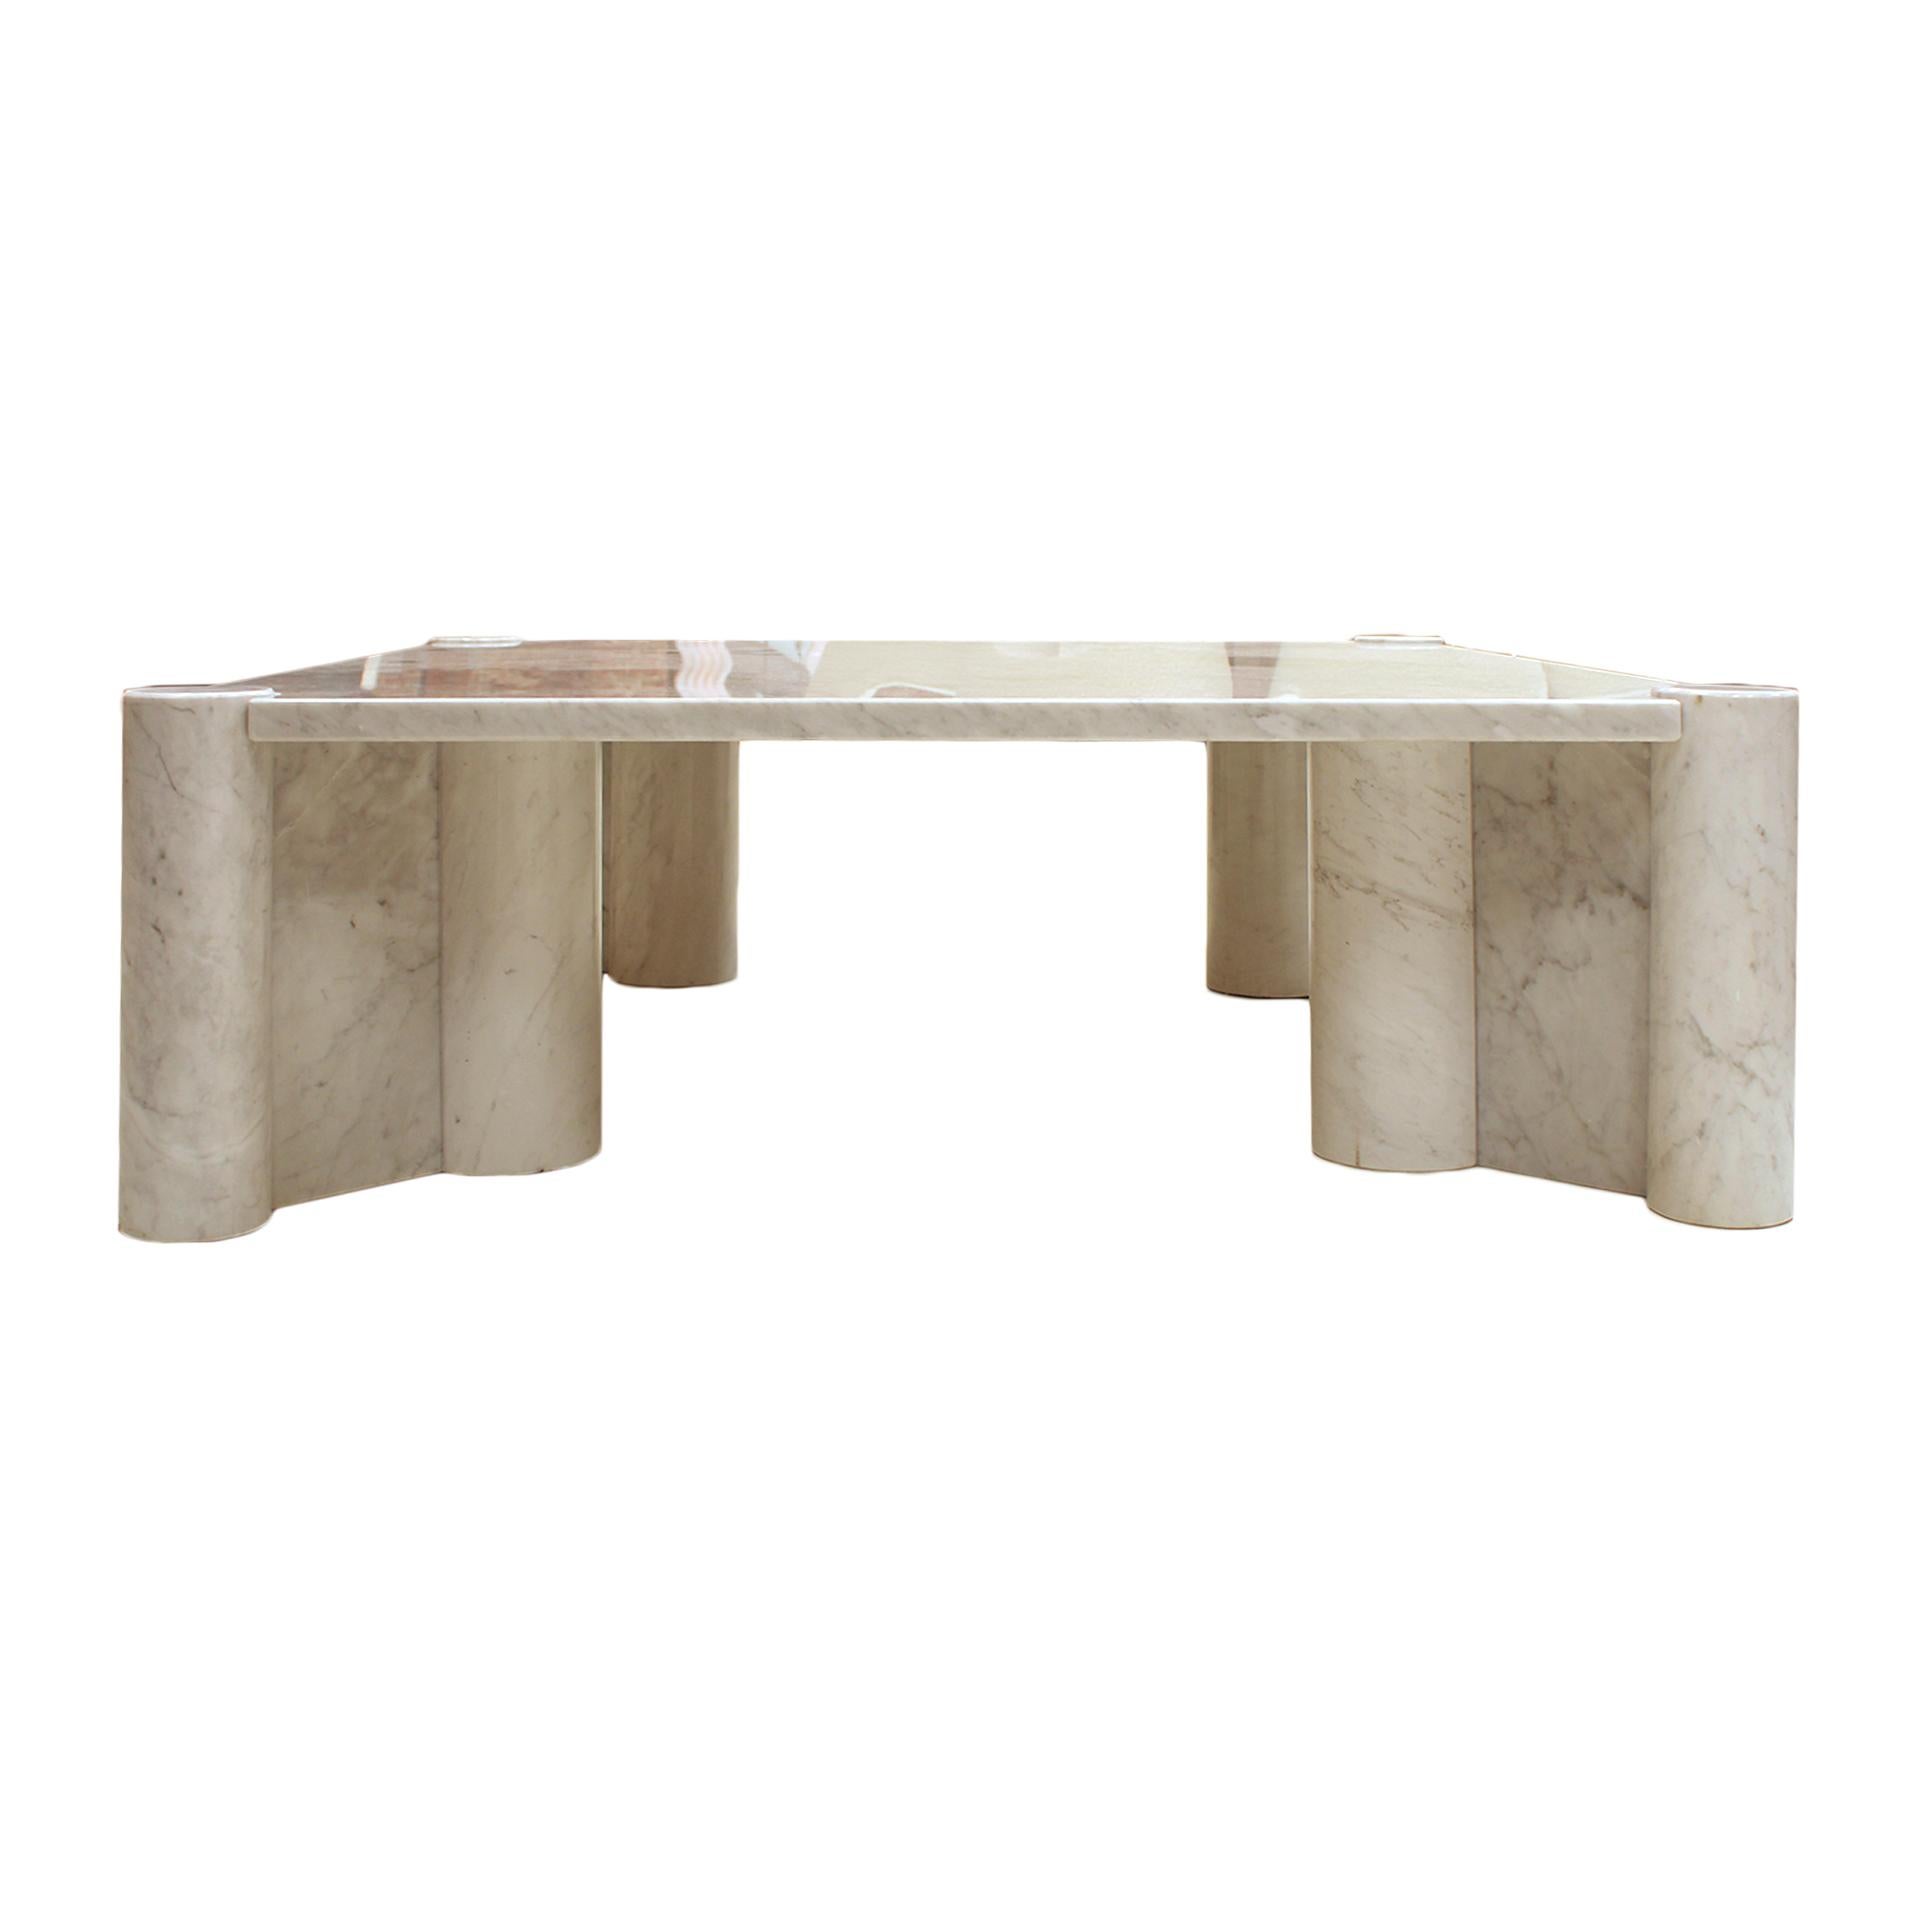 Jumbo Carrara Marble Italian Square Coffee Table by Gae Aulenti For Knoll, 1960s For Sale 1